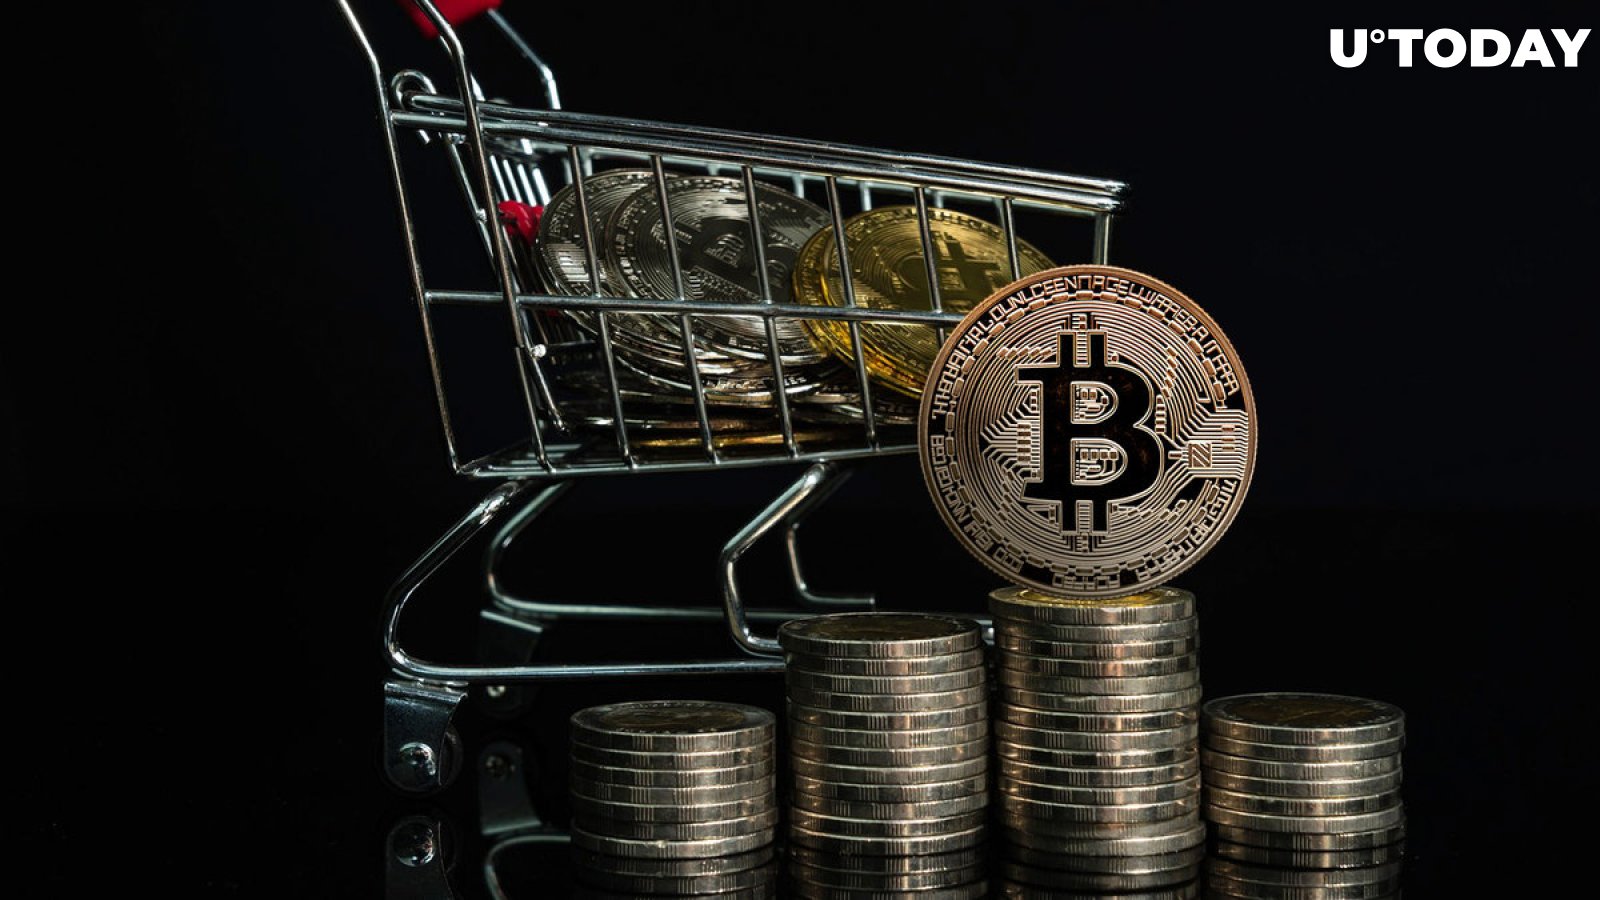 Bitcoin (BTC) Faces Sell Signal, Correction Likely, Analyst Says